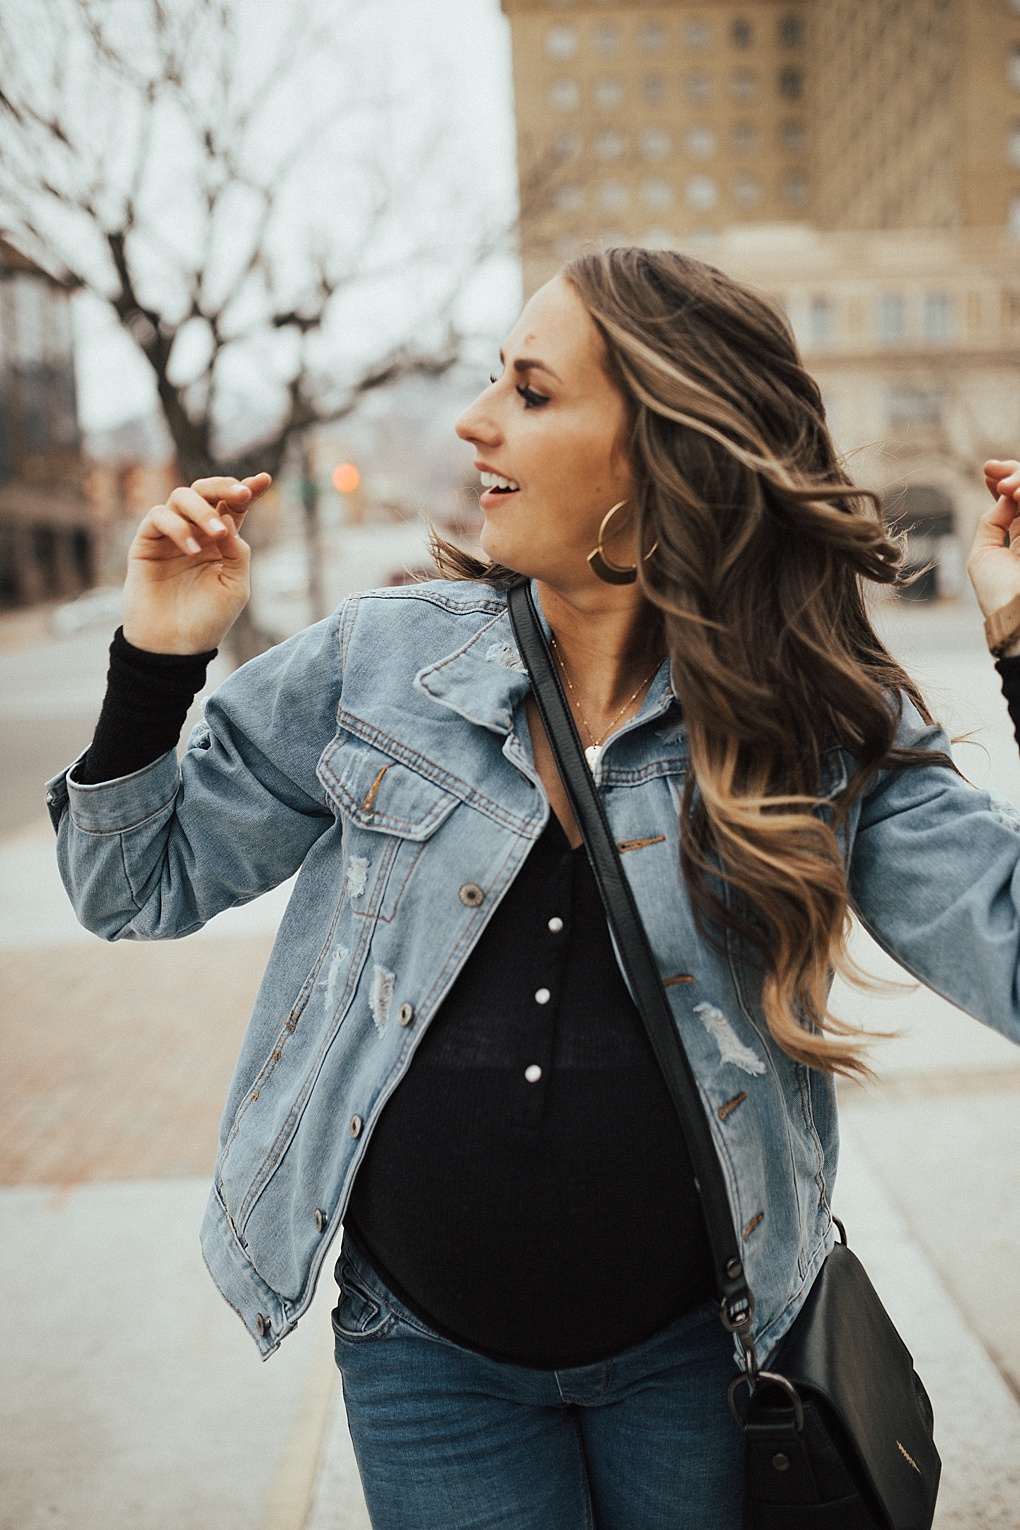 SAVE this ASAP for the perfect tips on how to master the oversized jacket trend this spring thanks to Utah Style Blogger Dani Marie! 